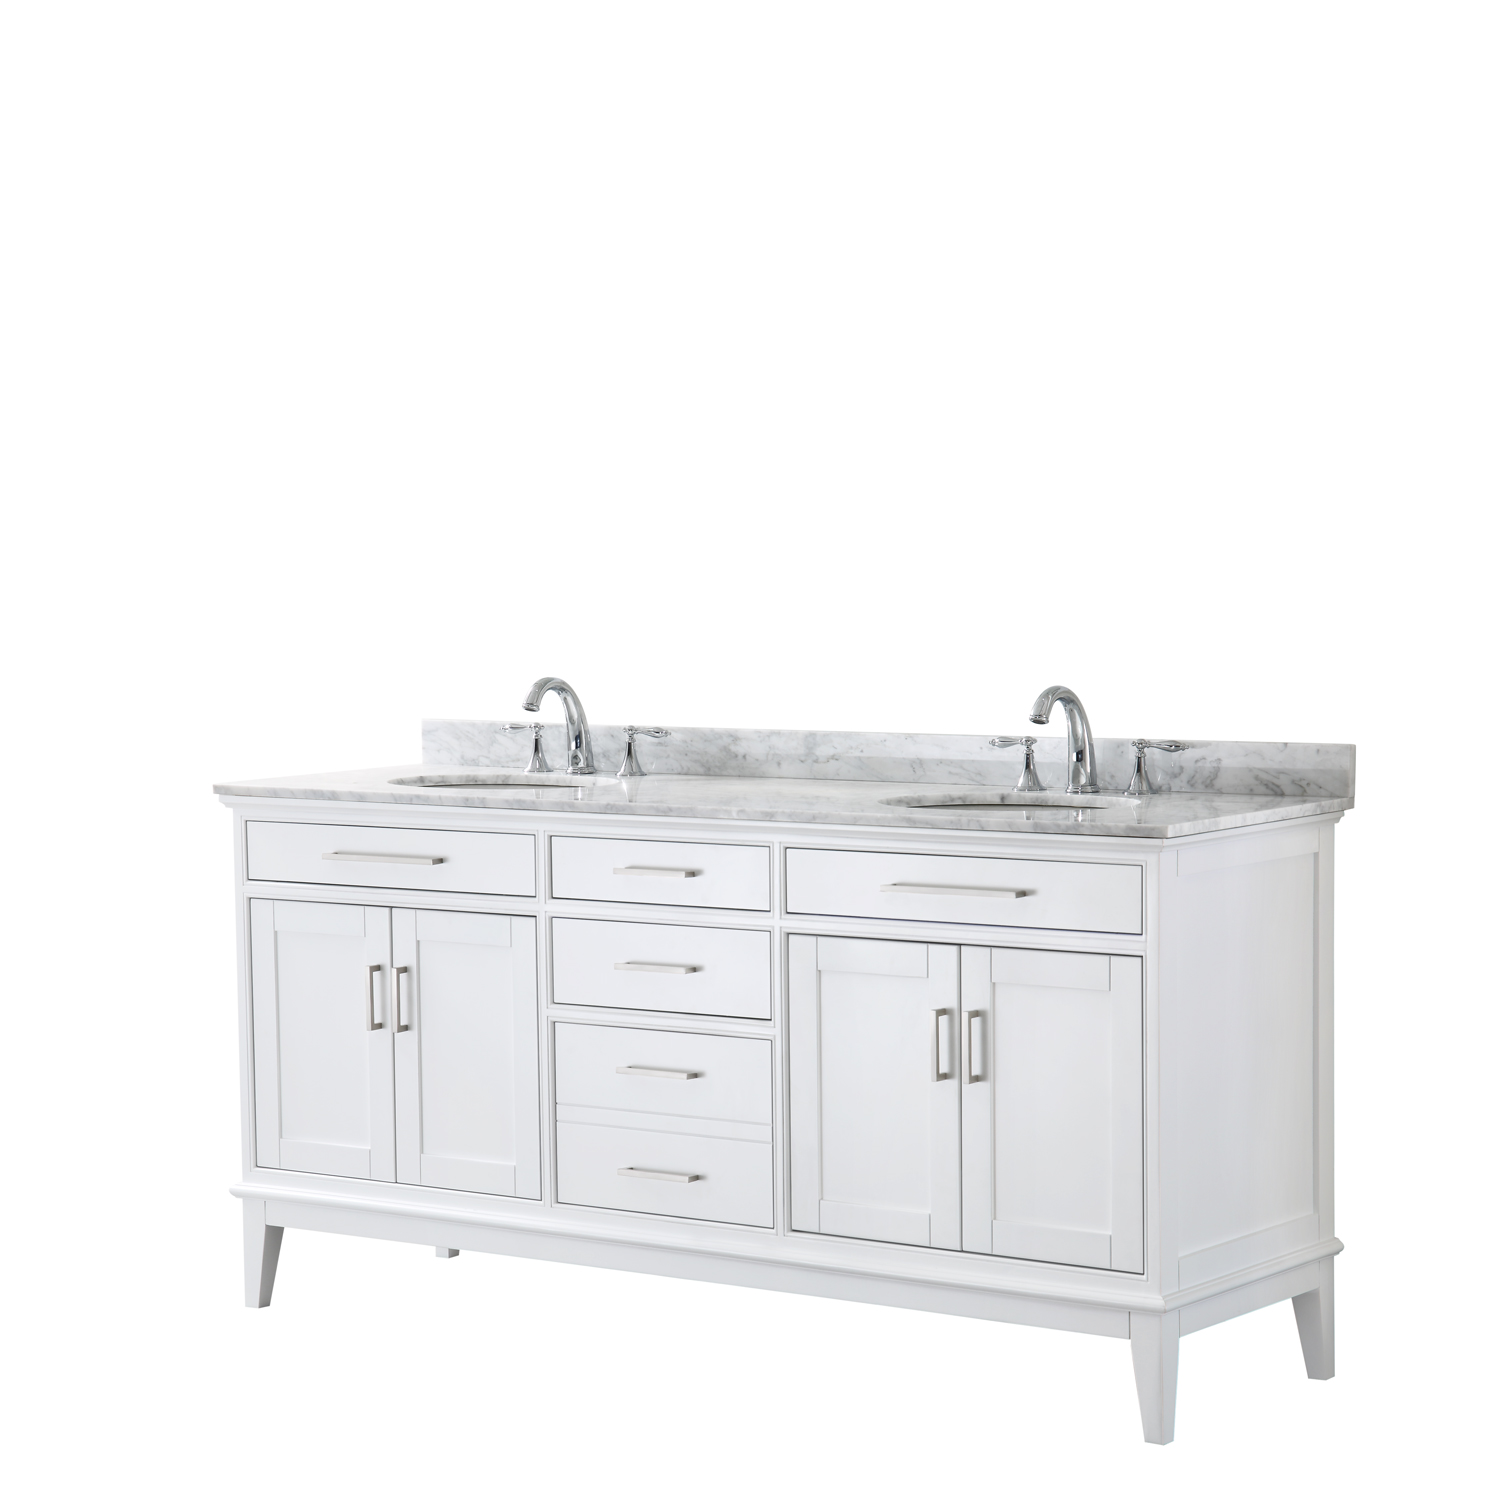 Contemporary 72" Double Bathroom Vanity in White, White Carrara Marble Countertop with Undermount Sinks, and Mirror Options